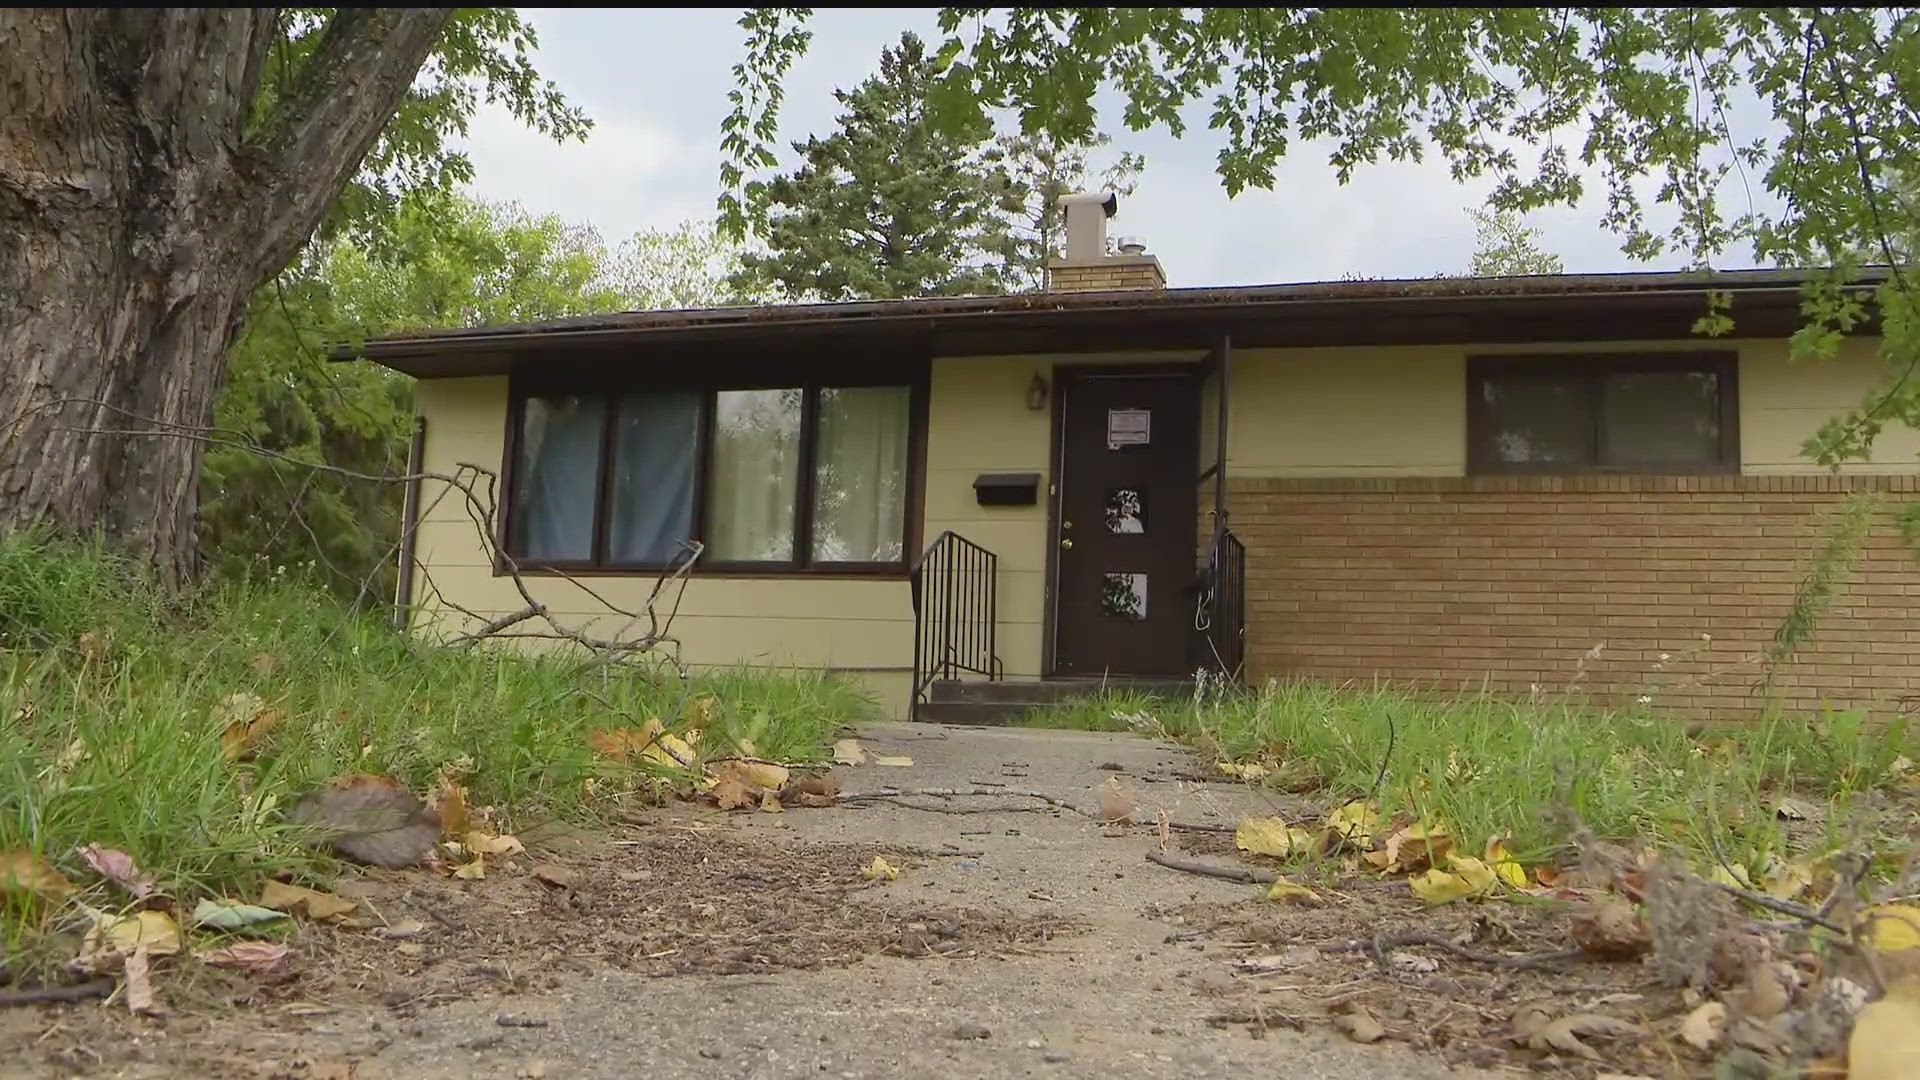 Bemidji residents say they have more questions than answers after a young girl was allegedly gang raped in a home across from an elementary school.